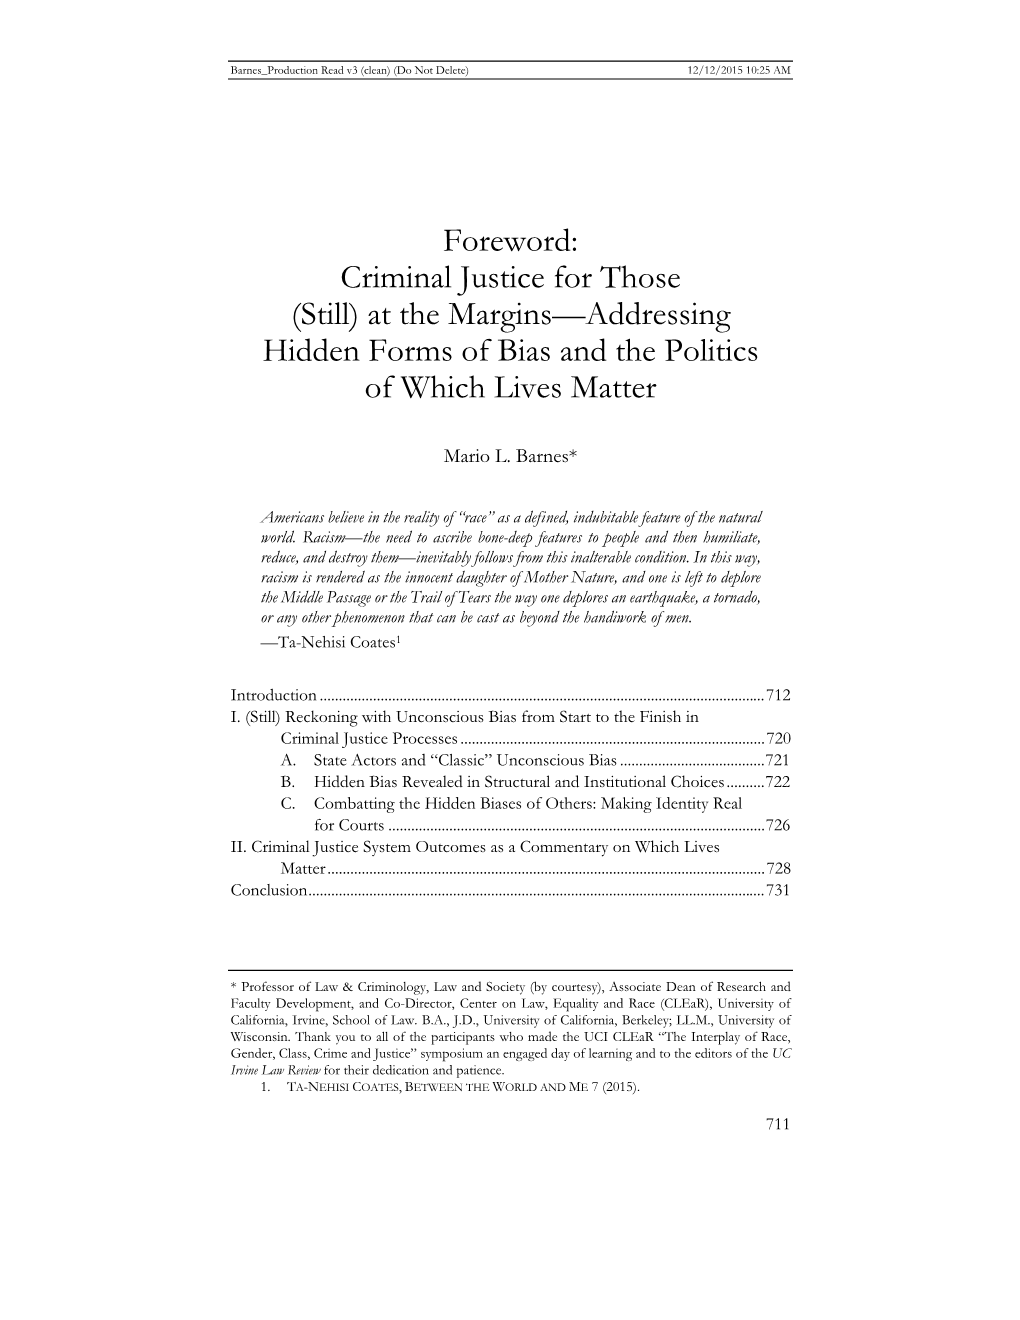 Foreword: Criminal Justice for Those (Still) at the Margins—Addressing Hidden Forms of Bias and the Politics of Which Lives Matter